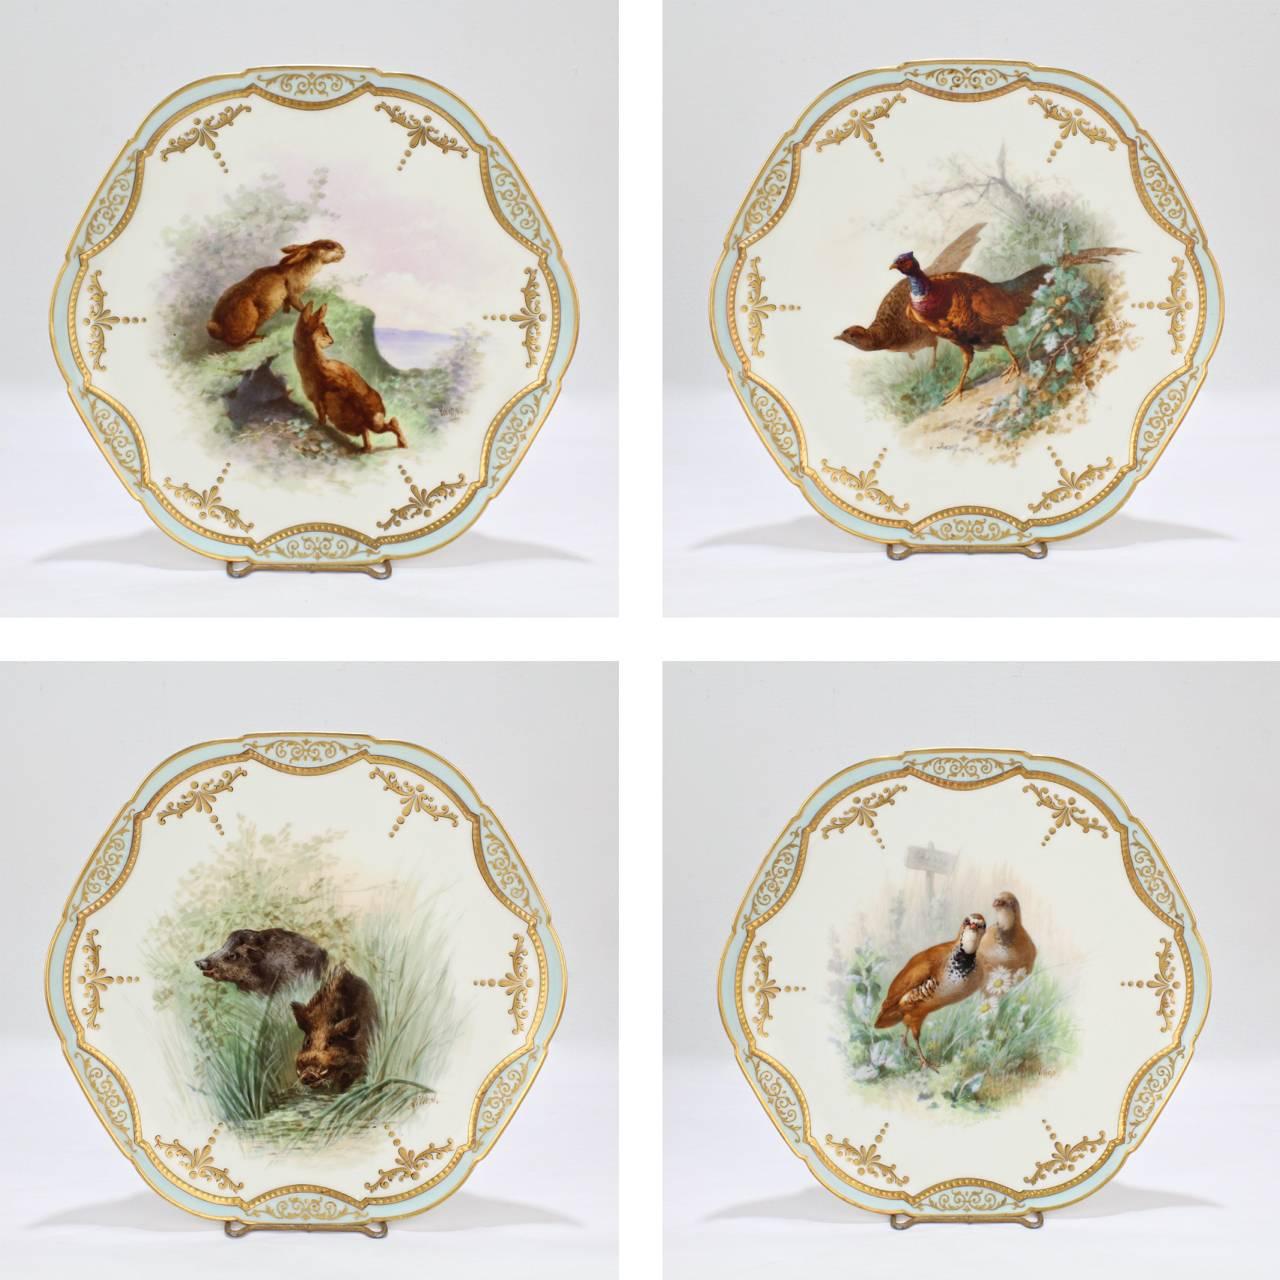 Aesthetic Movement 12 French Limoges Porcelain Narcisse Vivien Hand-Painted Game Plates